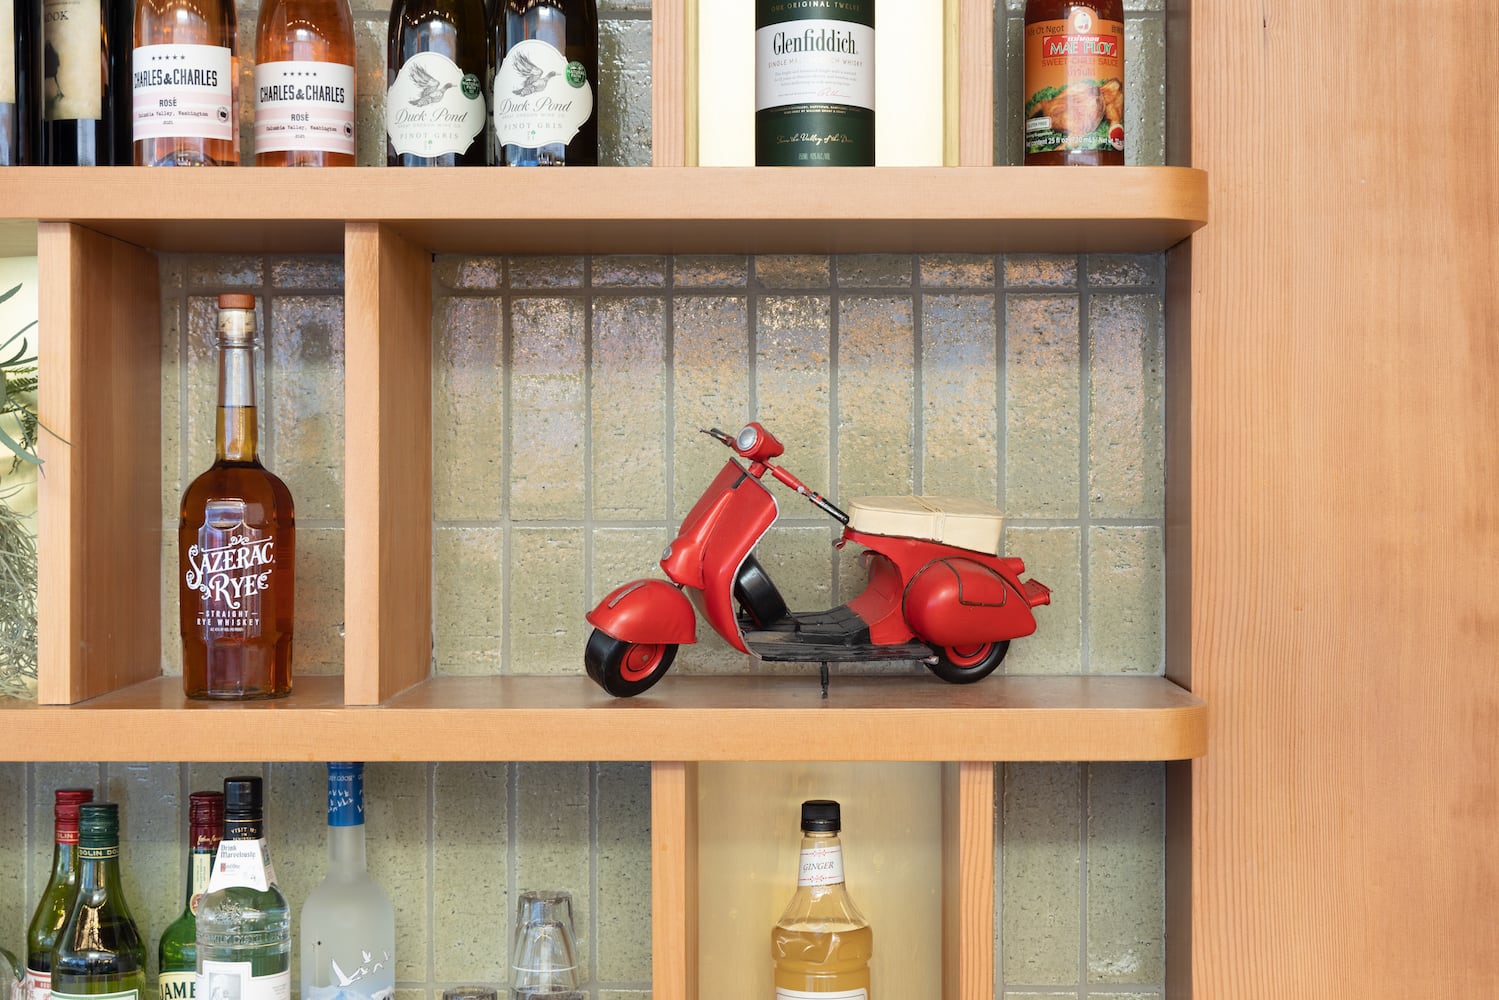 A miniature Vespa scooter sits among the cocktail ingredients behind the bar 